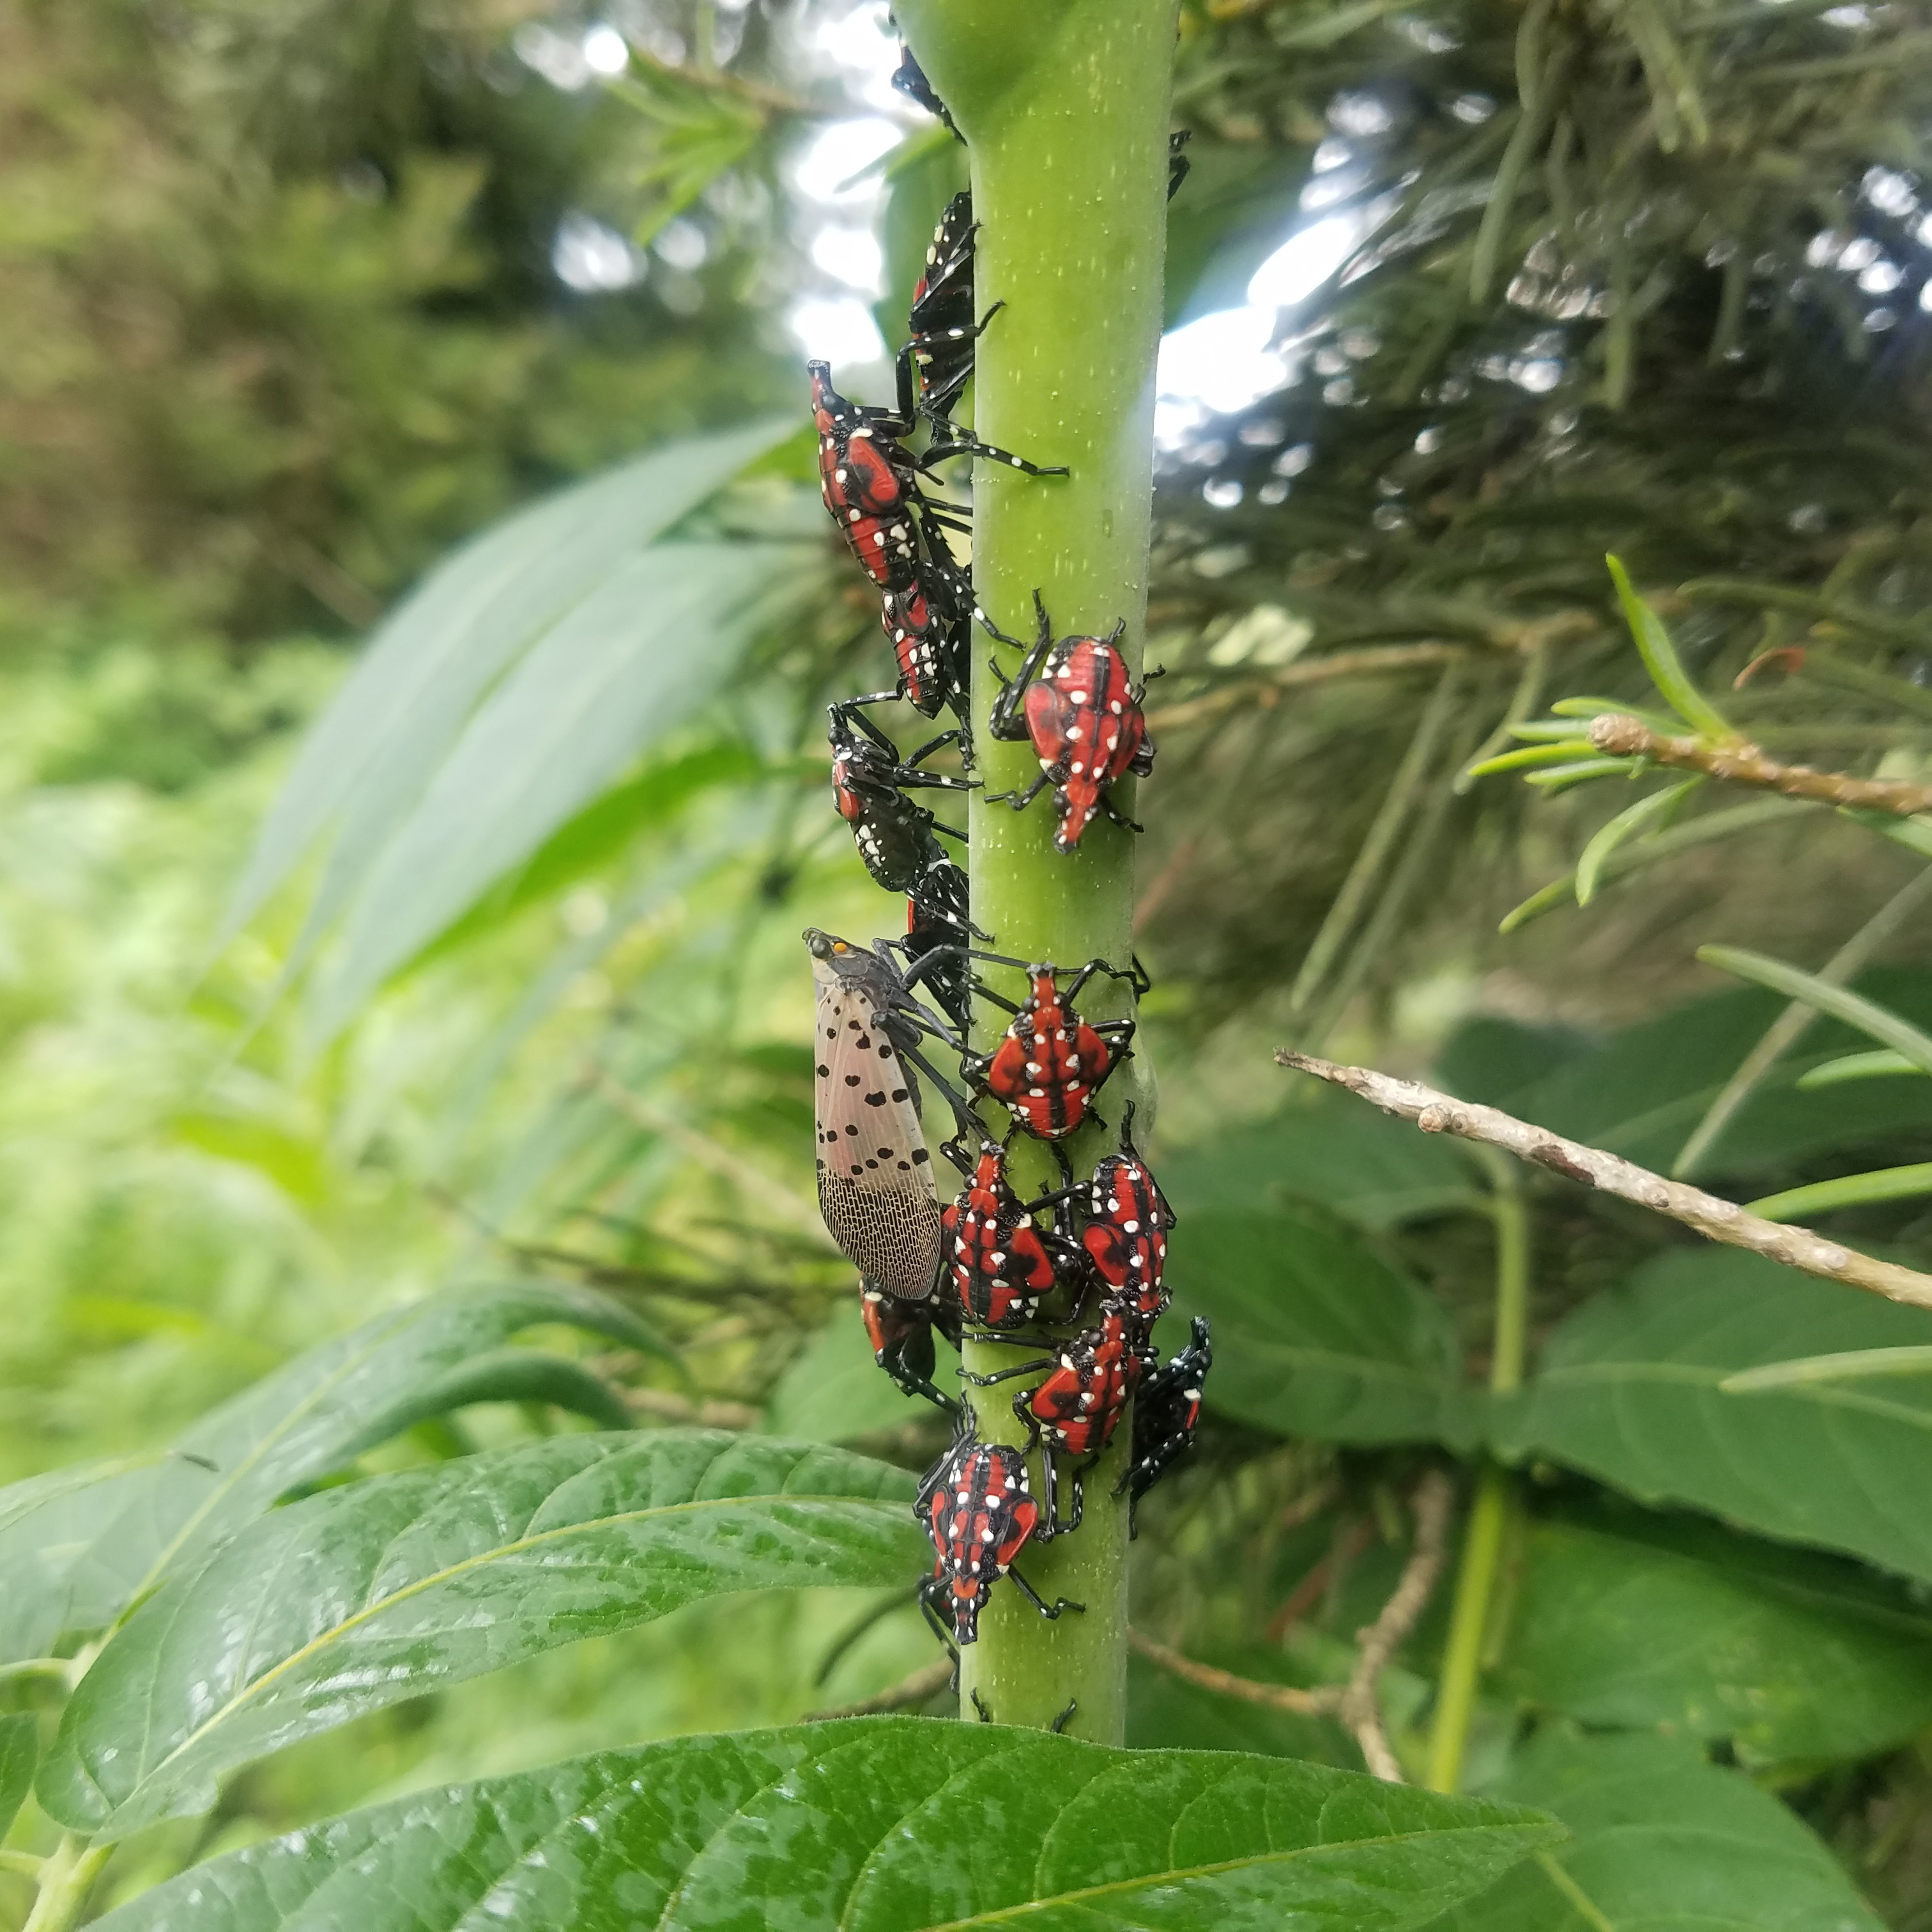 Spotted lanternflies on tree-of-heaven plant.